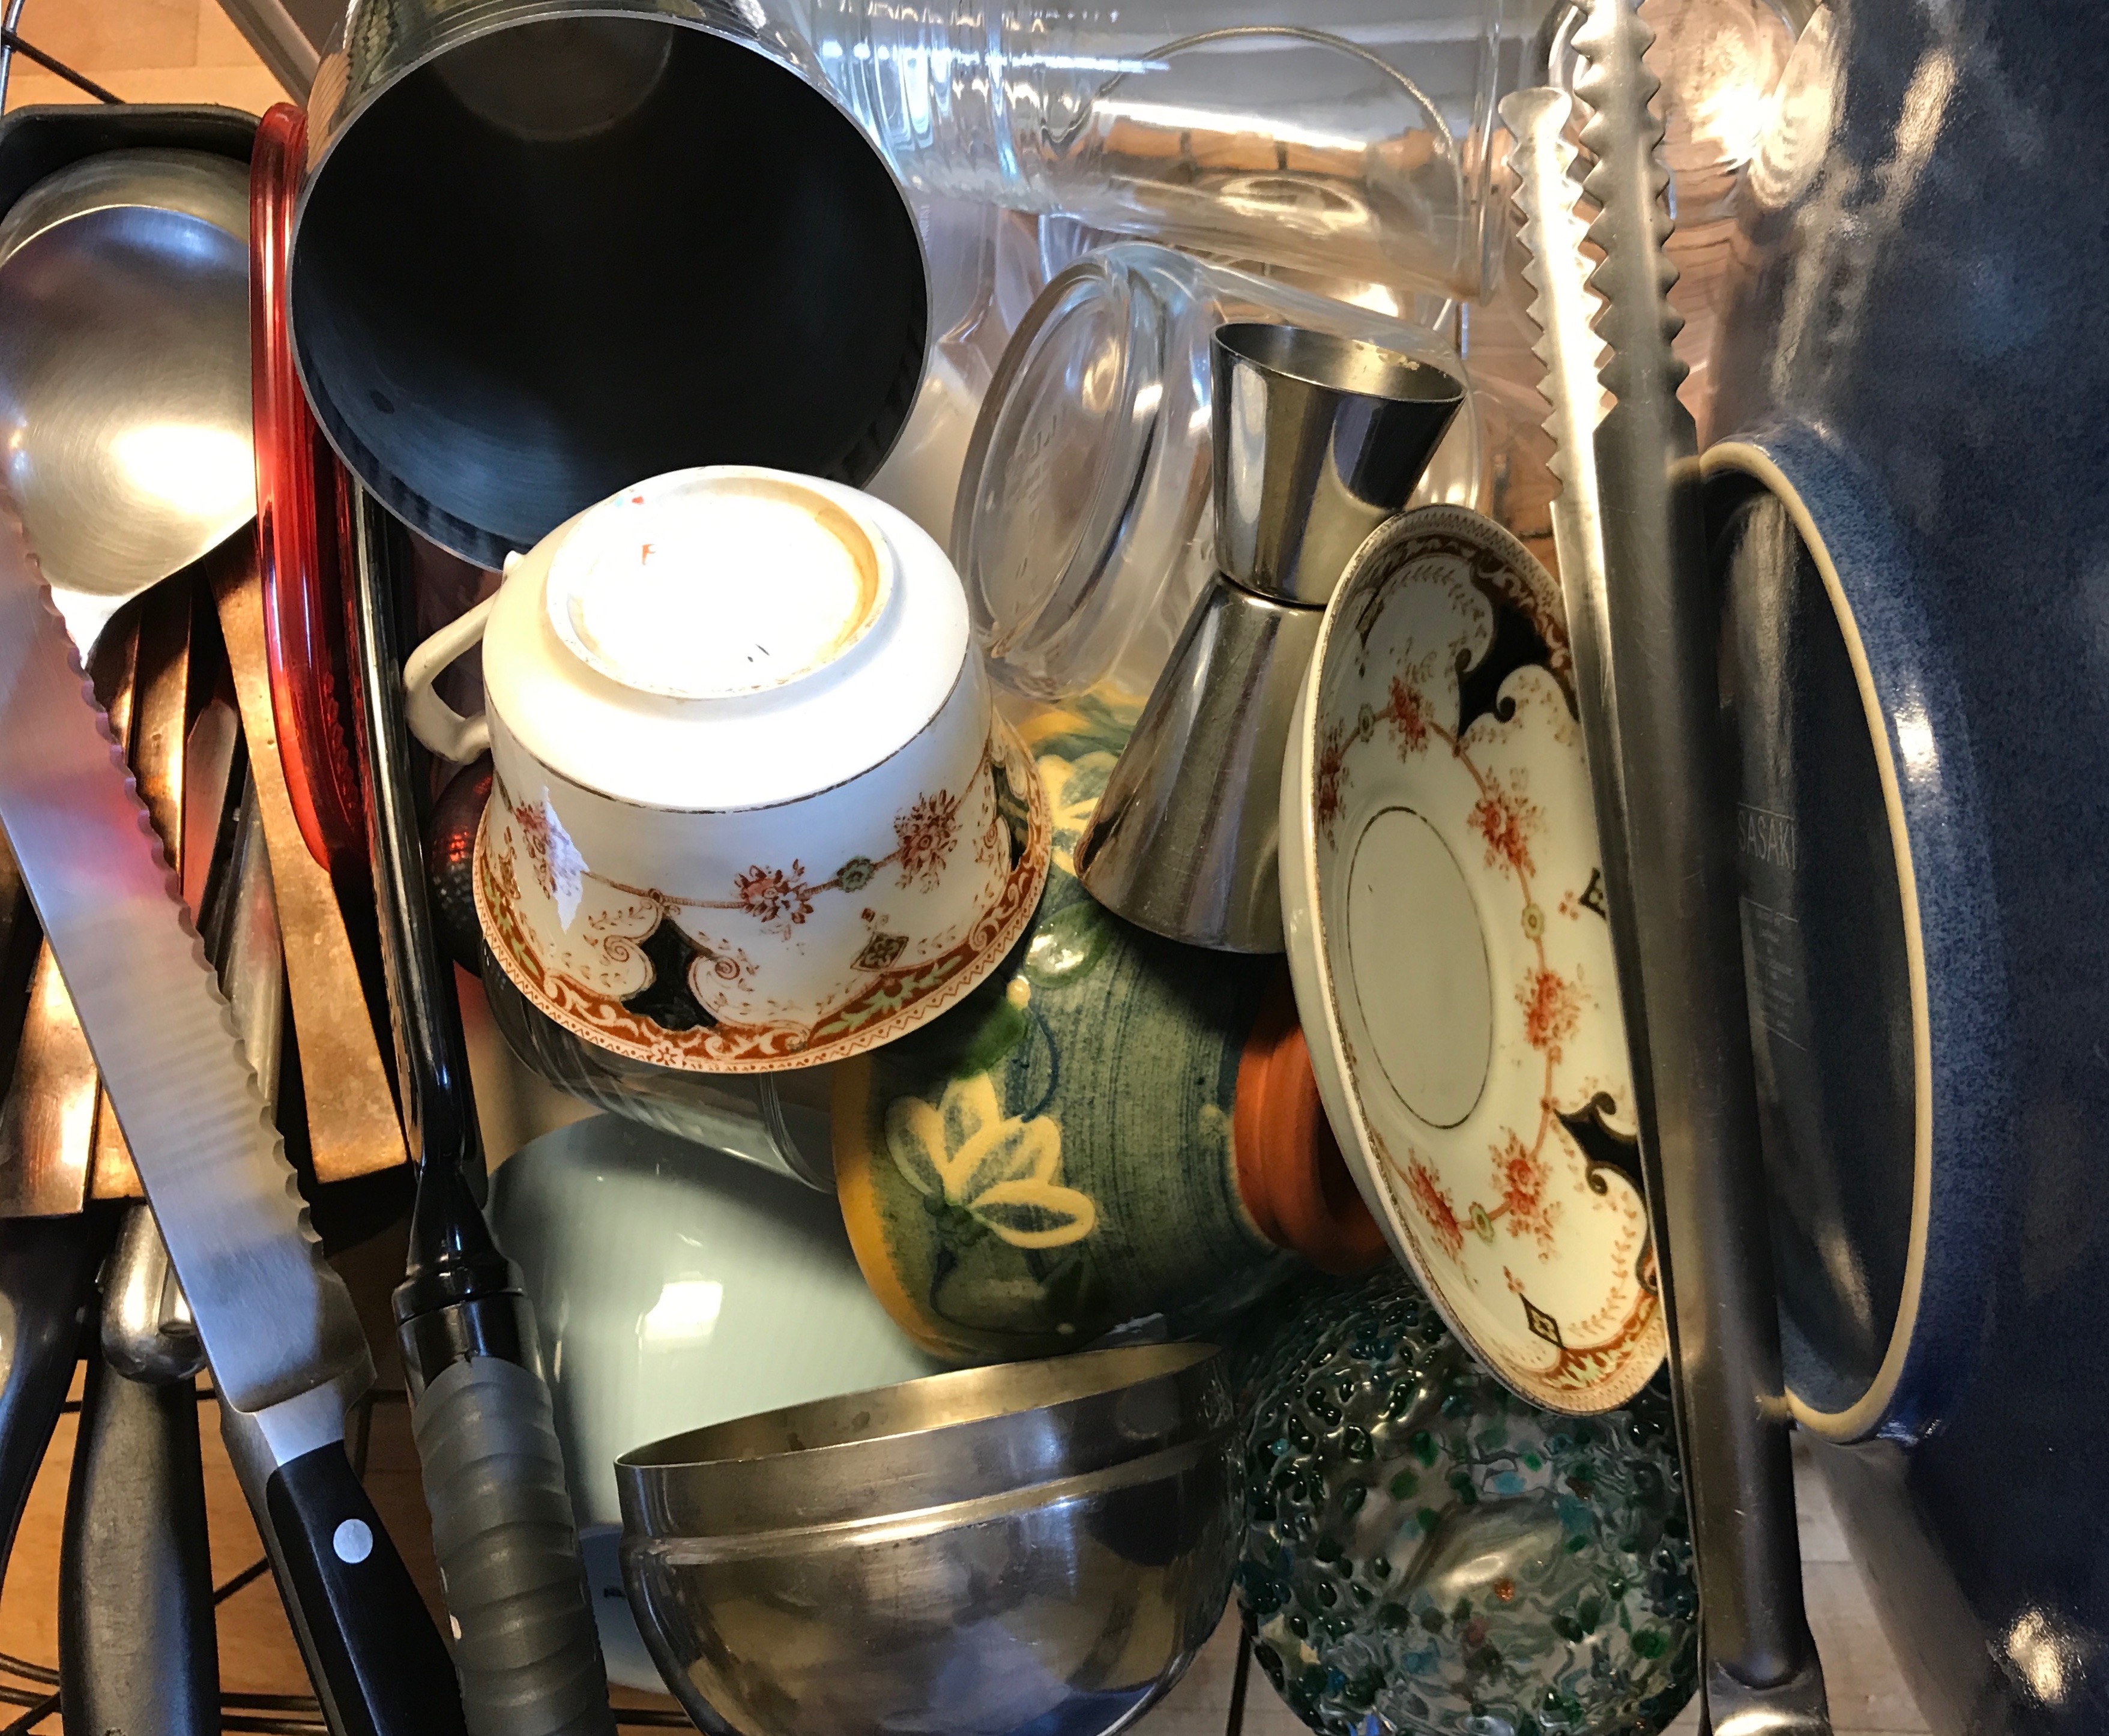 dish rack filled with dishes